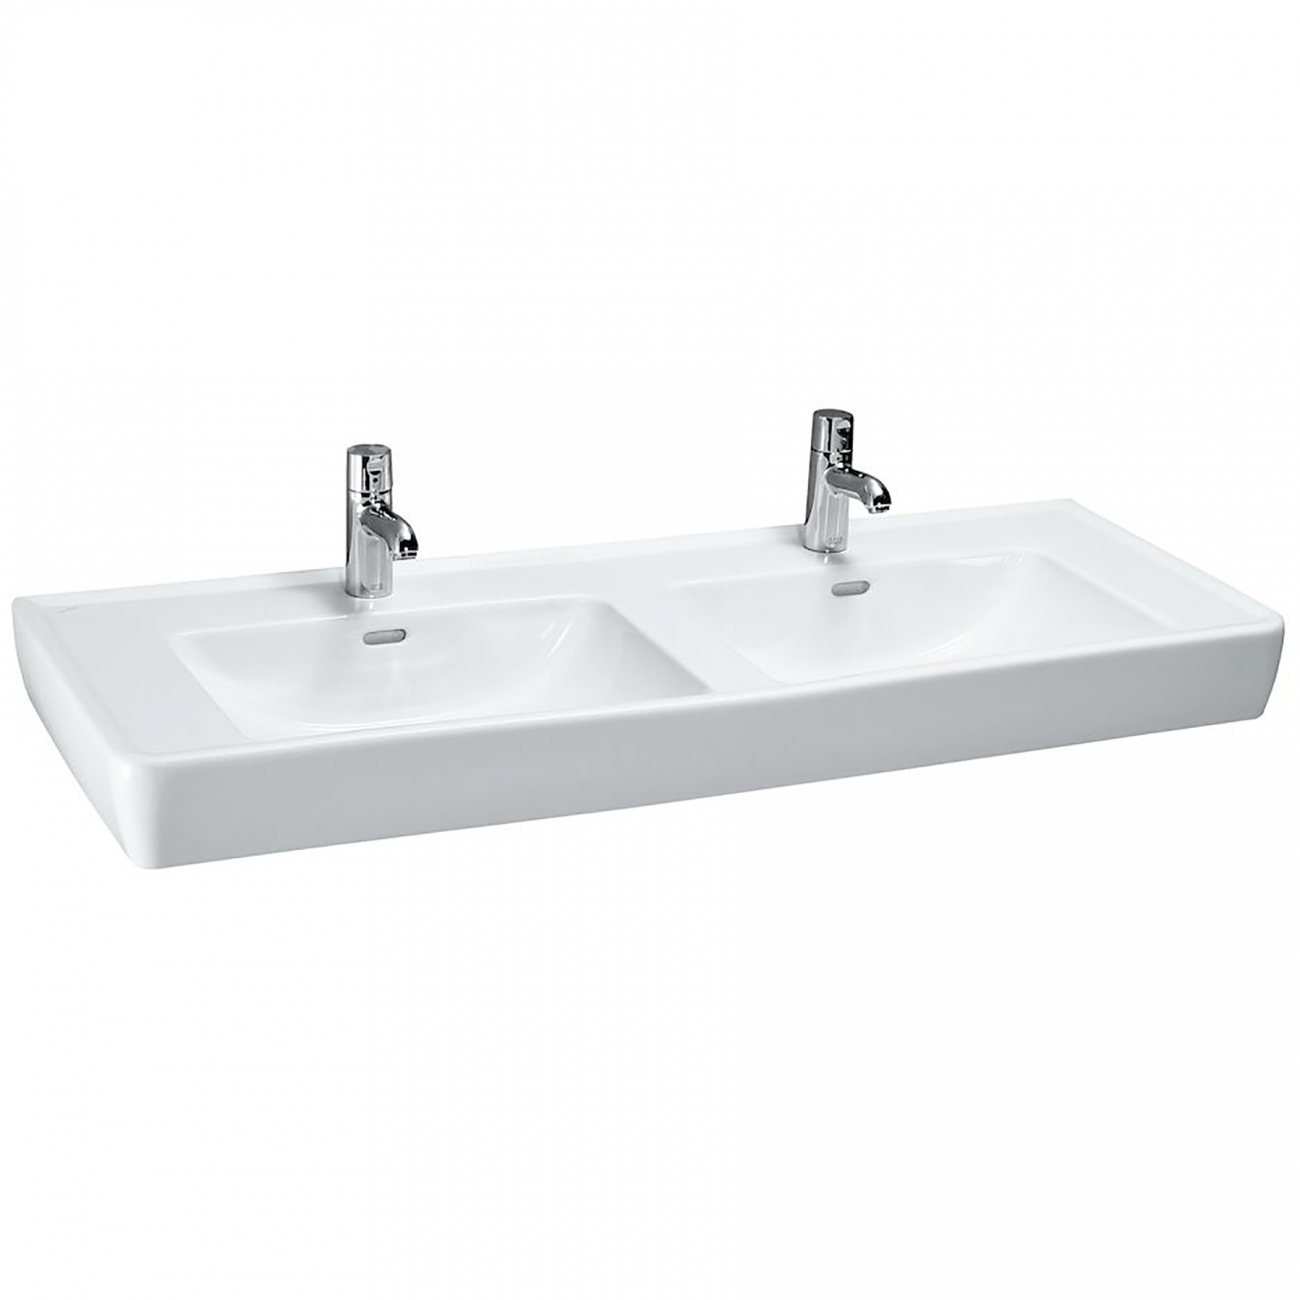 Laufen Pro A wall hung double basin